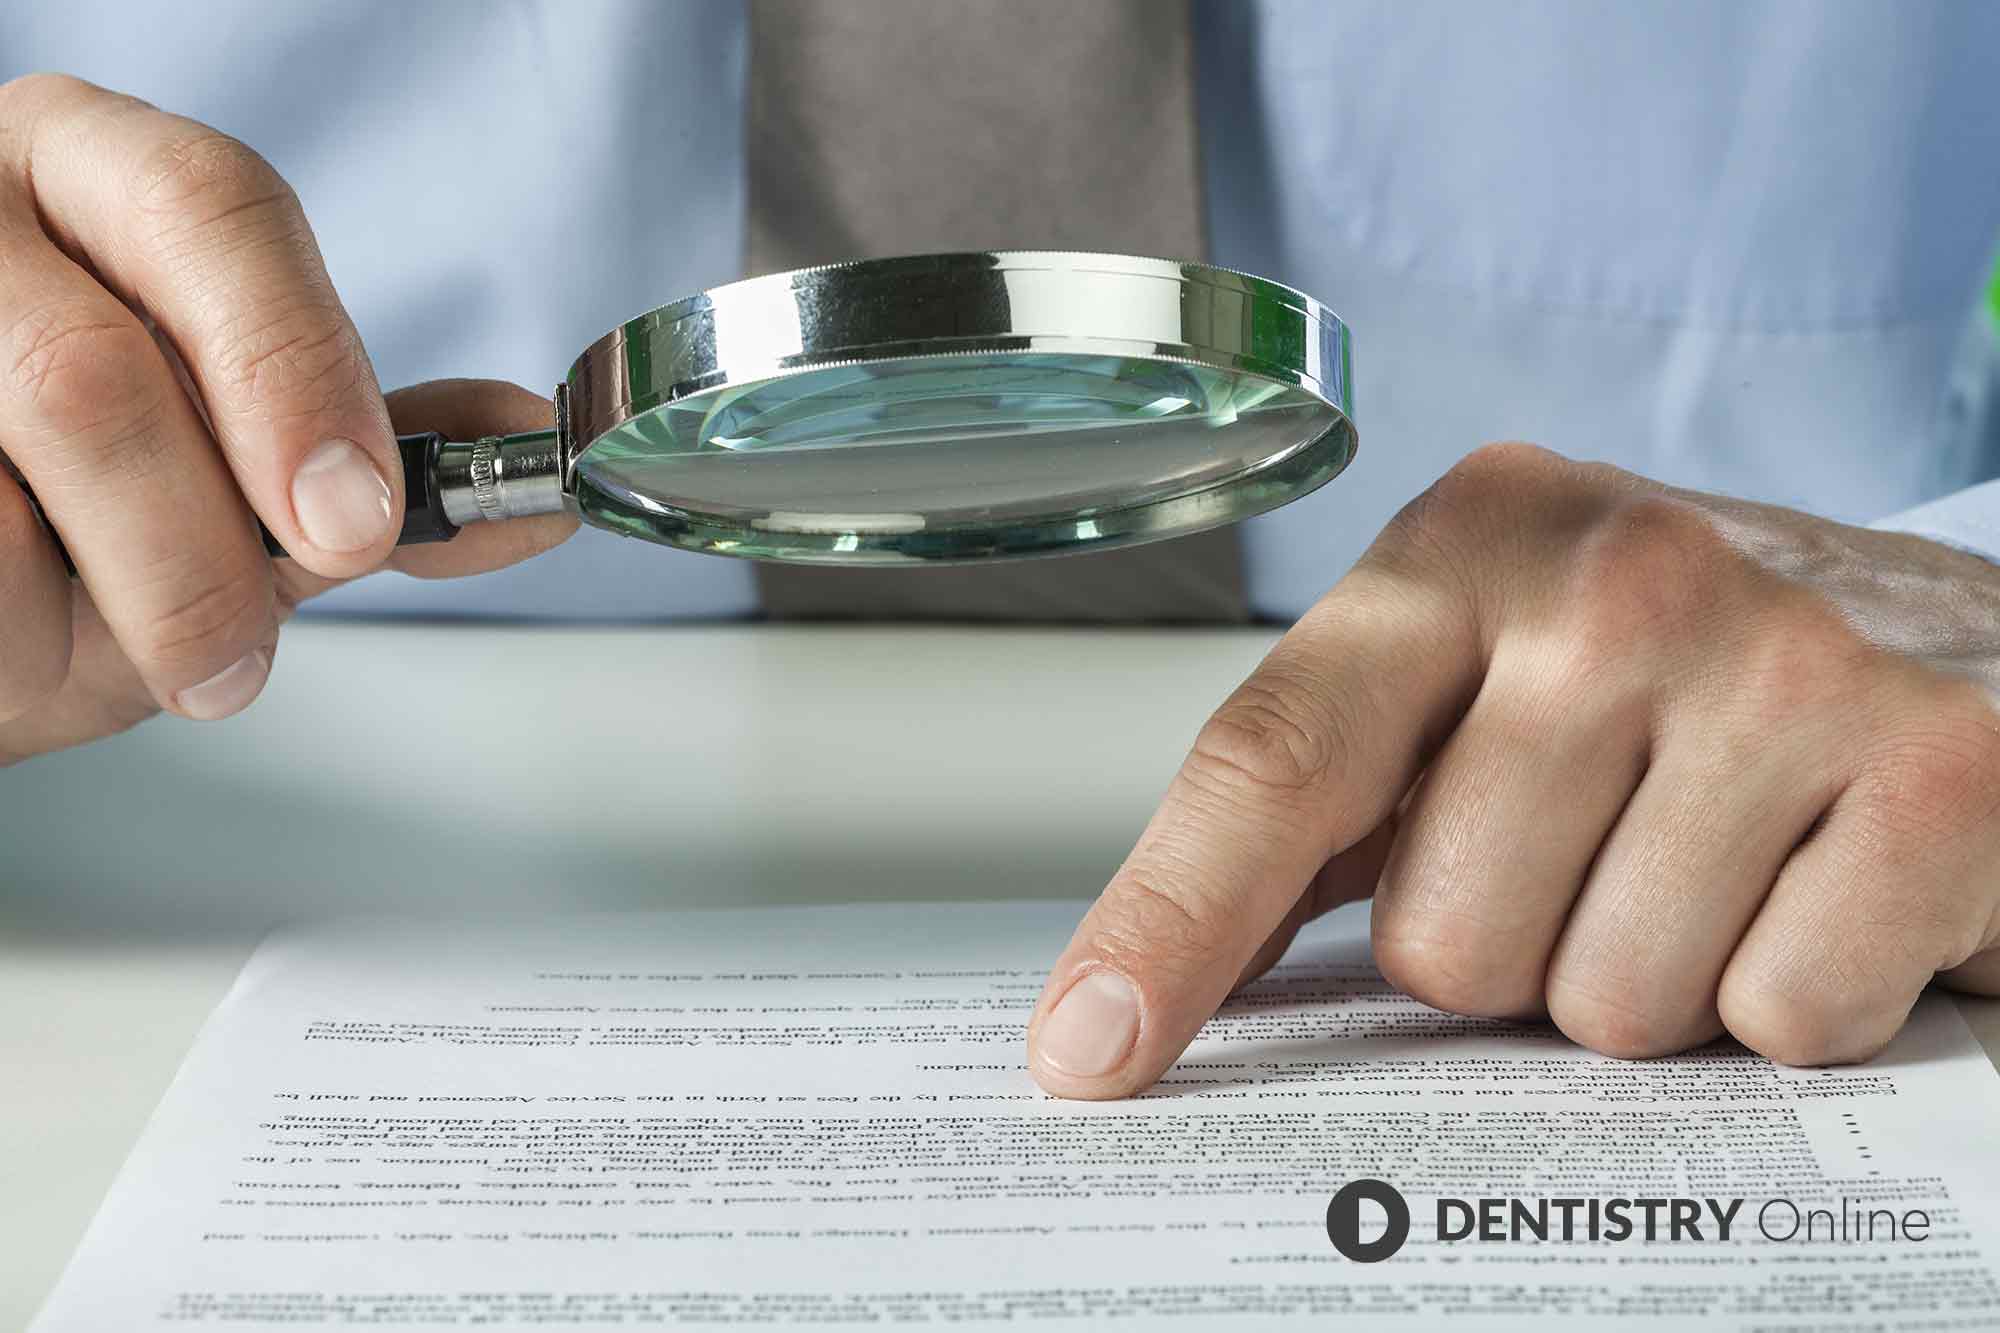 An increasing number of dentists say they fear a regulatory investigation from the GDC